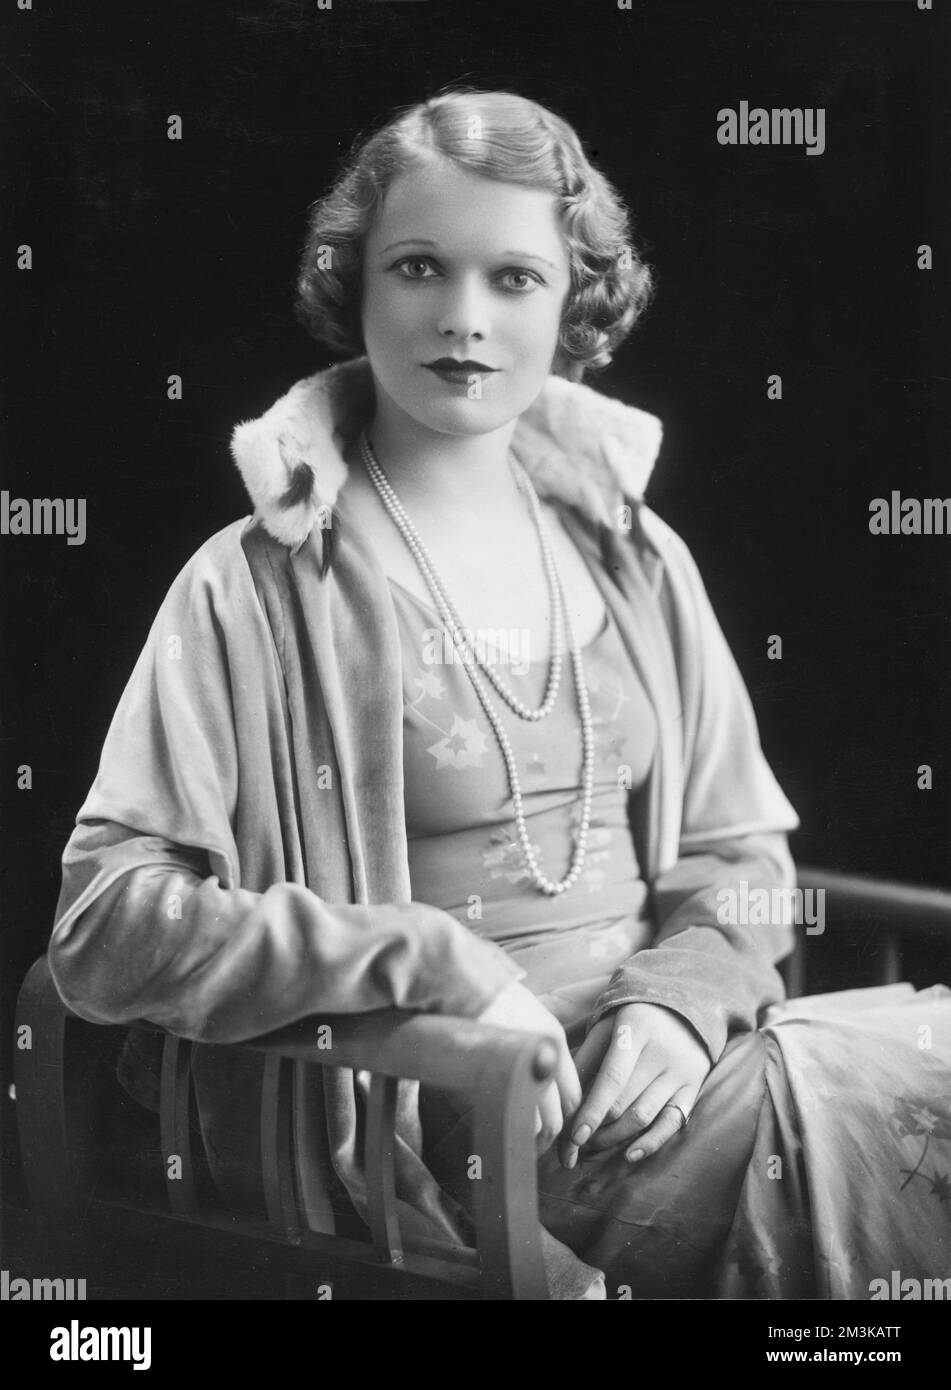 Photographic portrait of Dame Anna Neagle (1903 - 1986), born Flora Marjorie Robertson, British actress and film star.  Neagle soon became associated with the historical picture portraying Nell Gwynn and Queen Victoria on the silver screen.    c.1932 Stock Photo